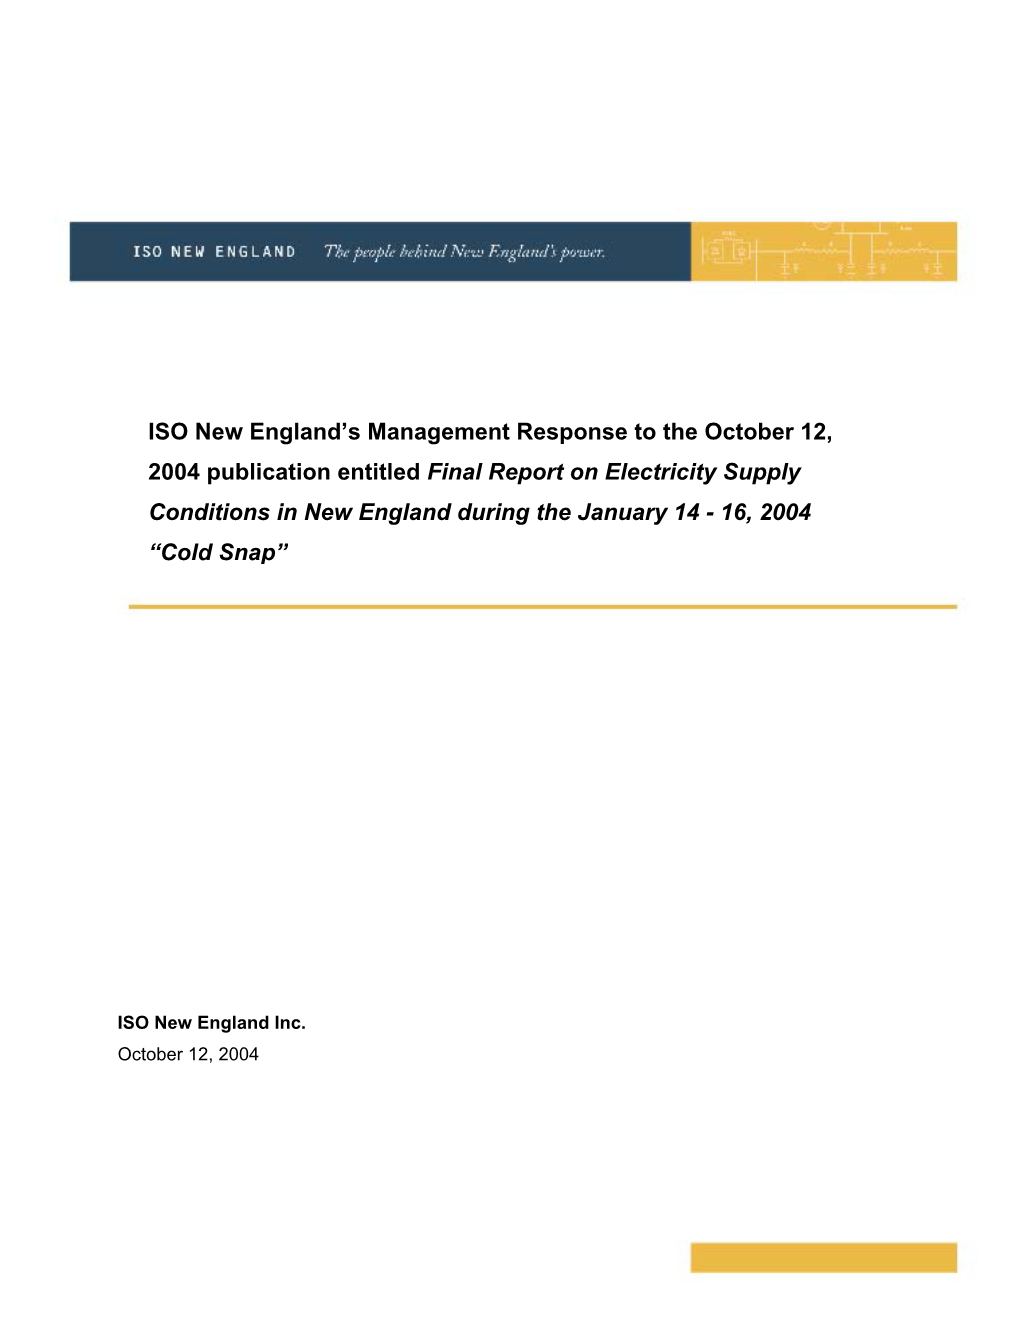 Cold Snap Report Recommendations and Iso Management Responses 5